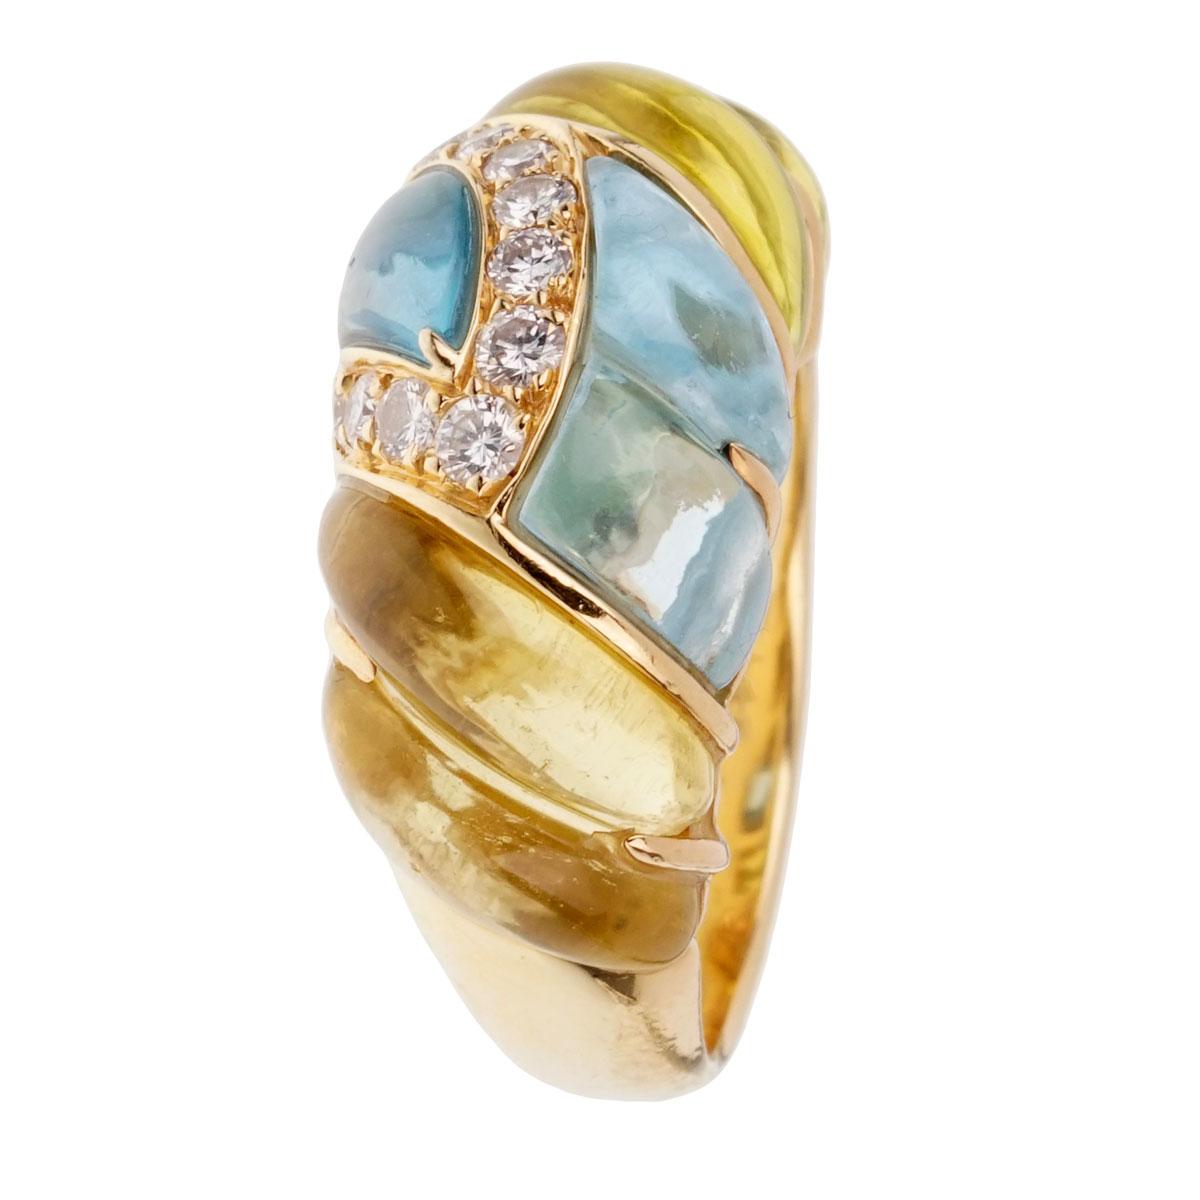 A fabulous vintage Dior ring with alternating lemon quartz and blue topaz set in 18k yellow gold. The ring is adorned with round brilliant cut diamonds.

Size 7 (Resizeable)